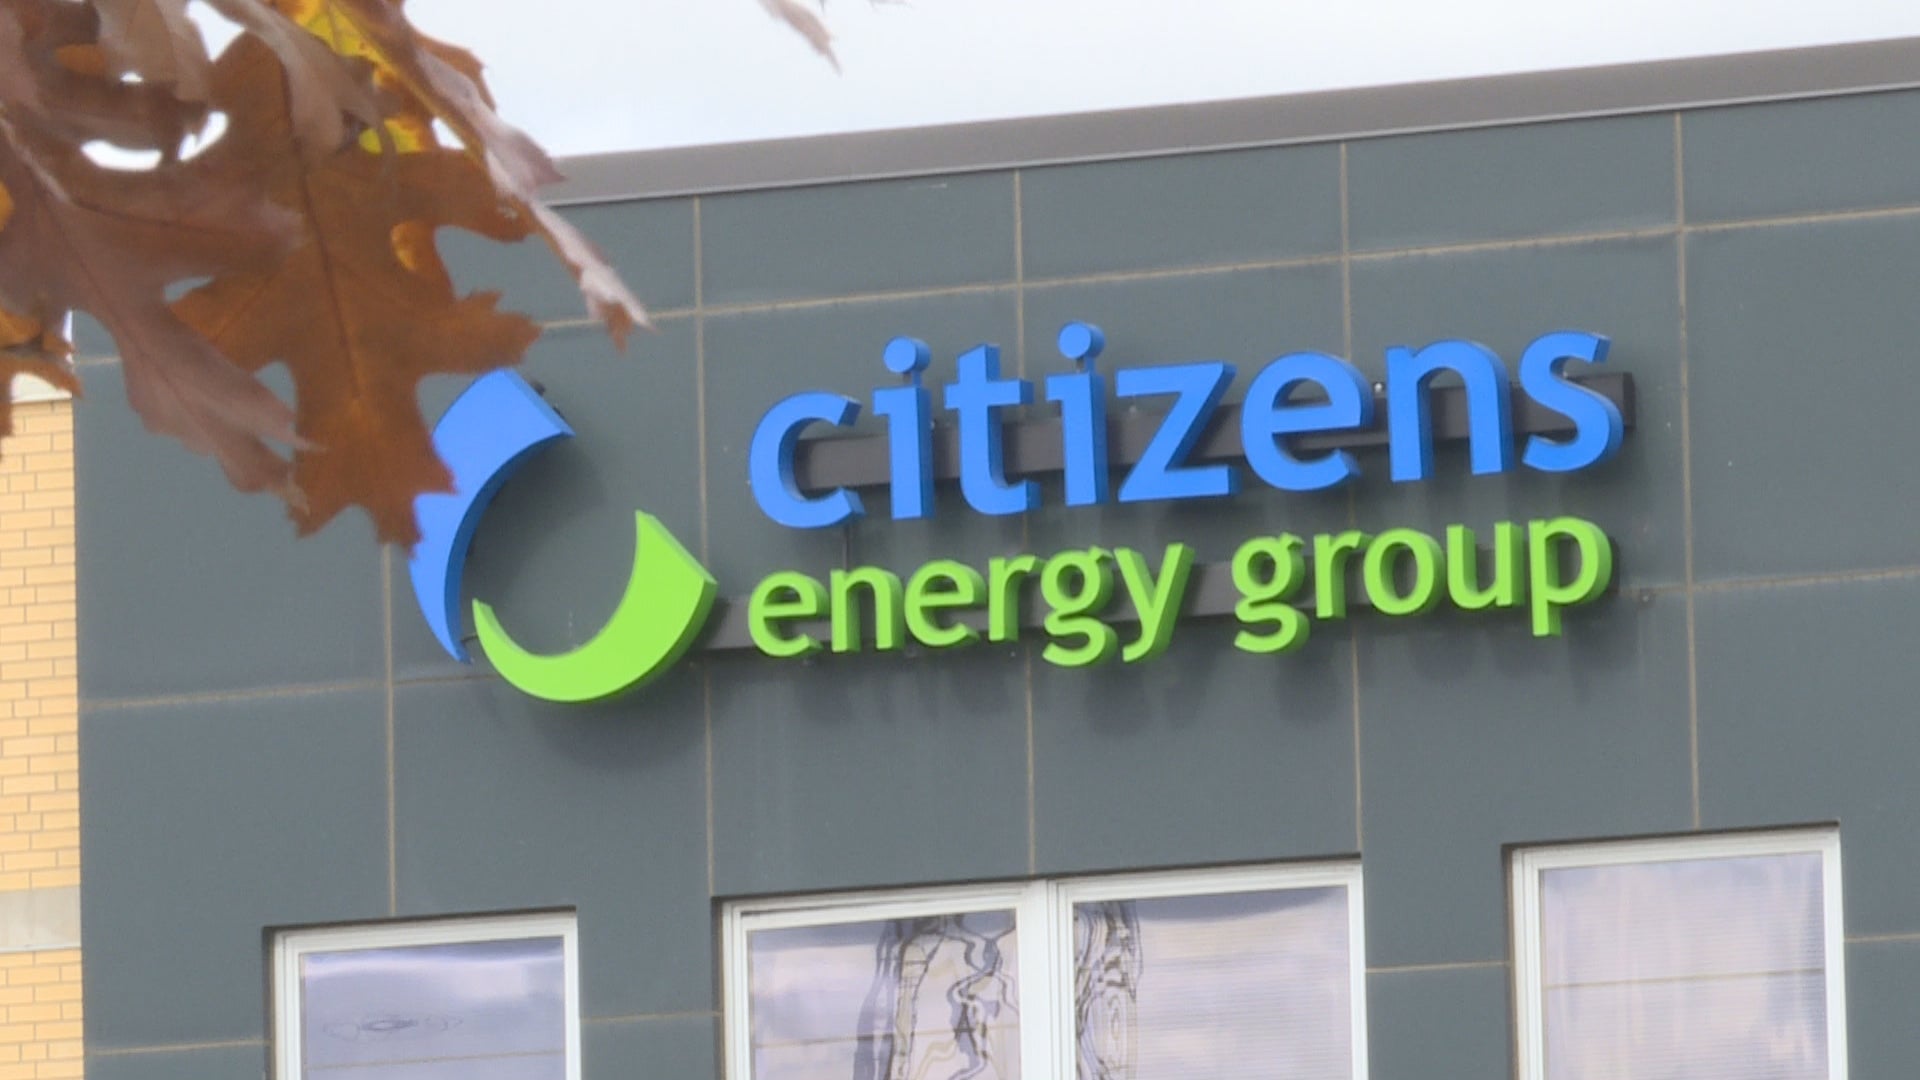 Rising energy costs add pressure on organizations in Indianapolis